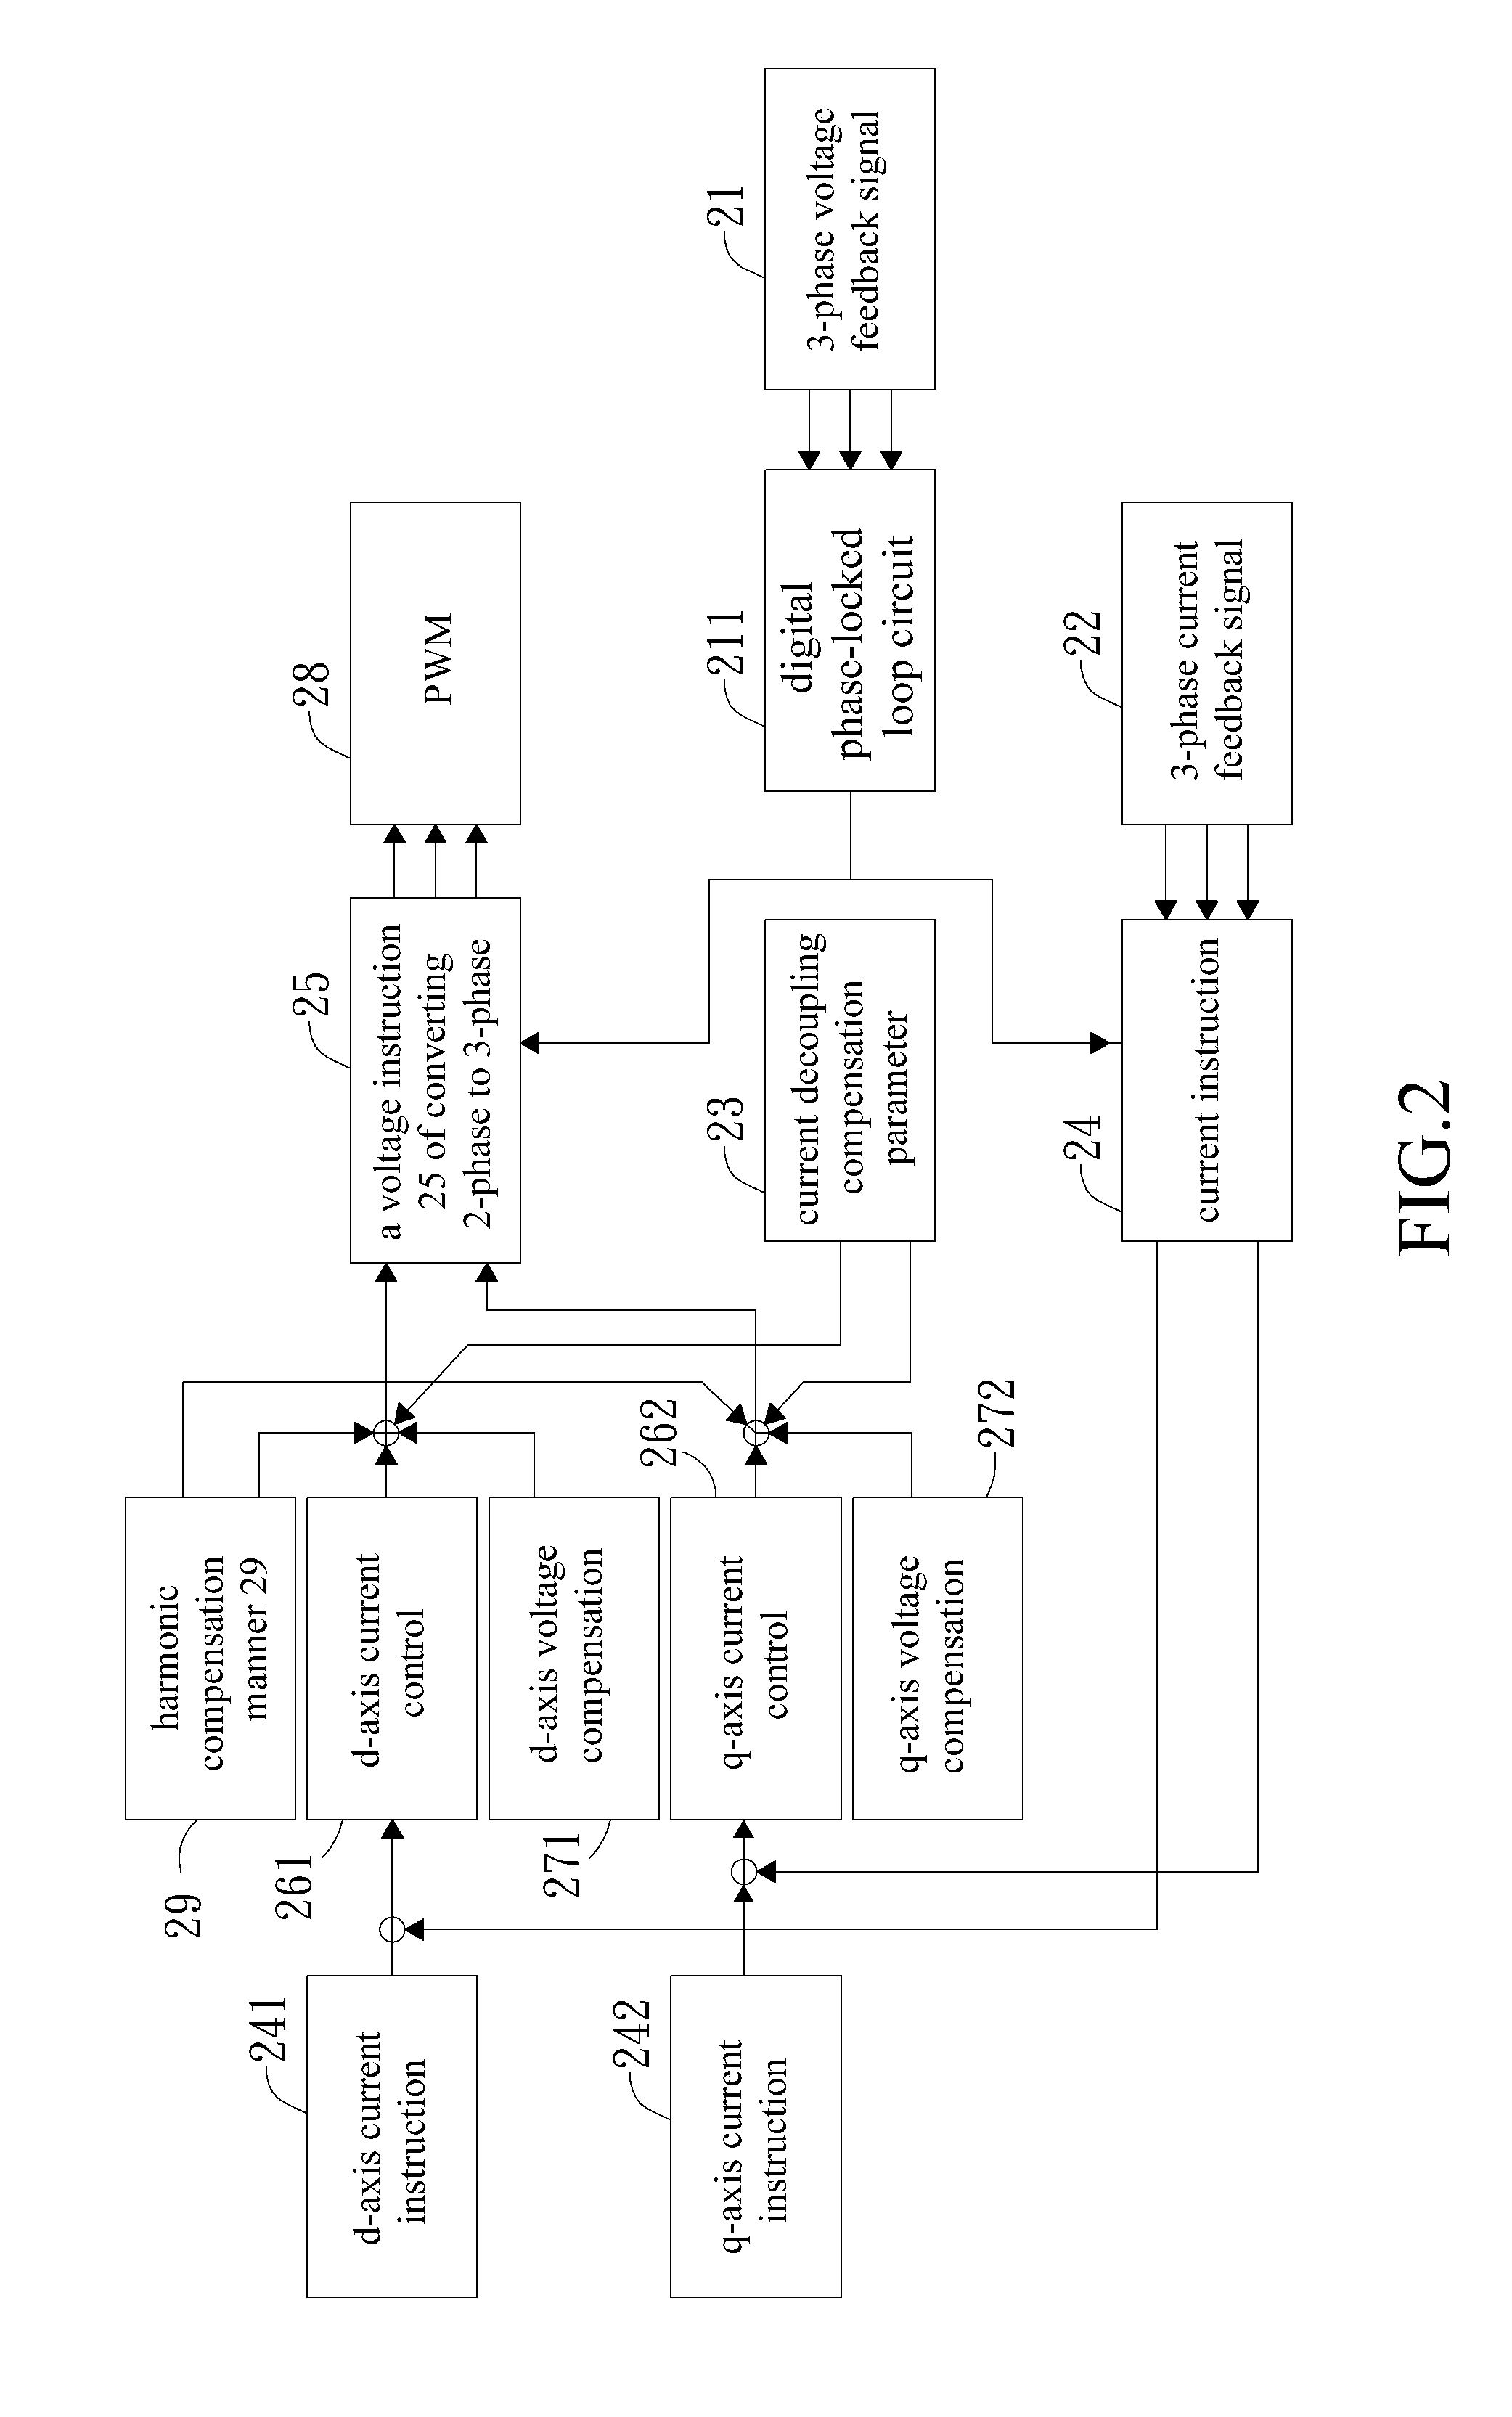 Power conversion system for controlling harmonics